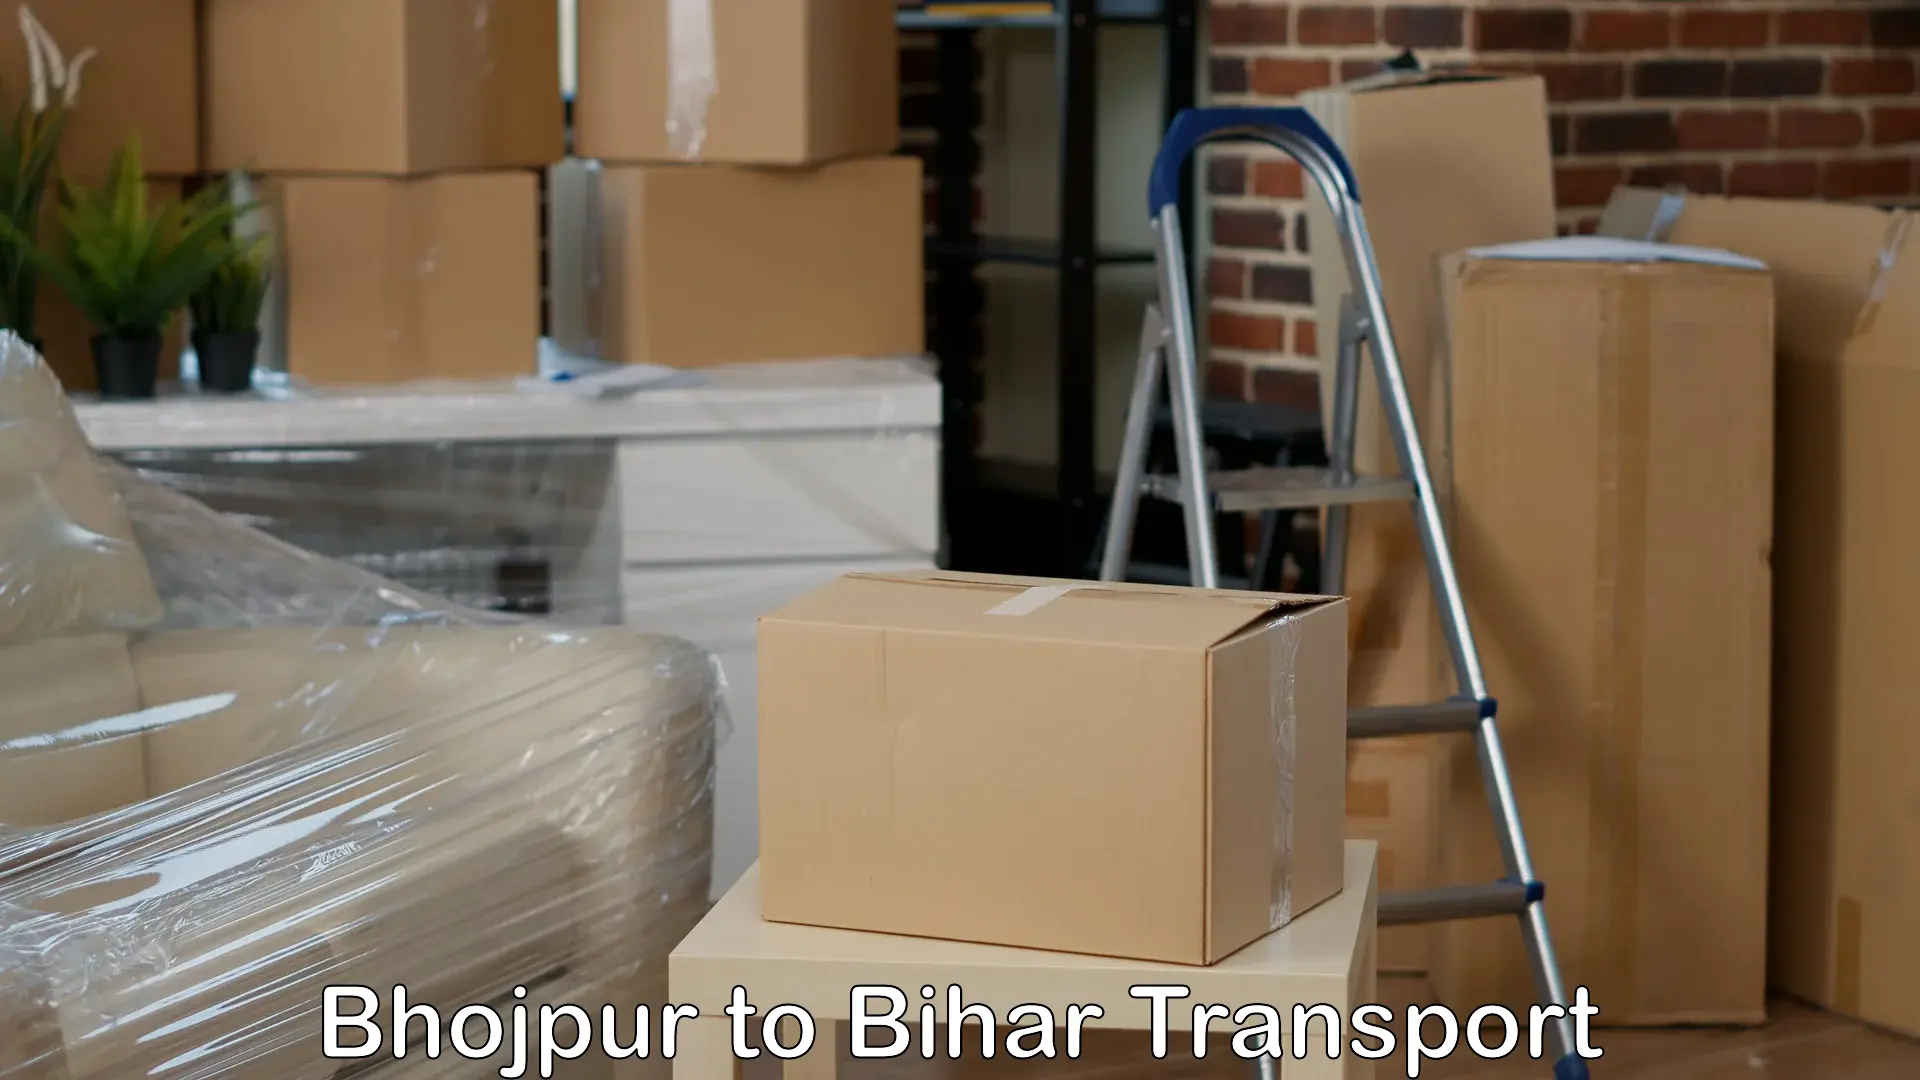 Daily parcel service transport Bhojpur to Simrahi Bazar